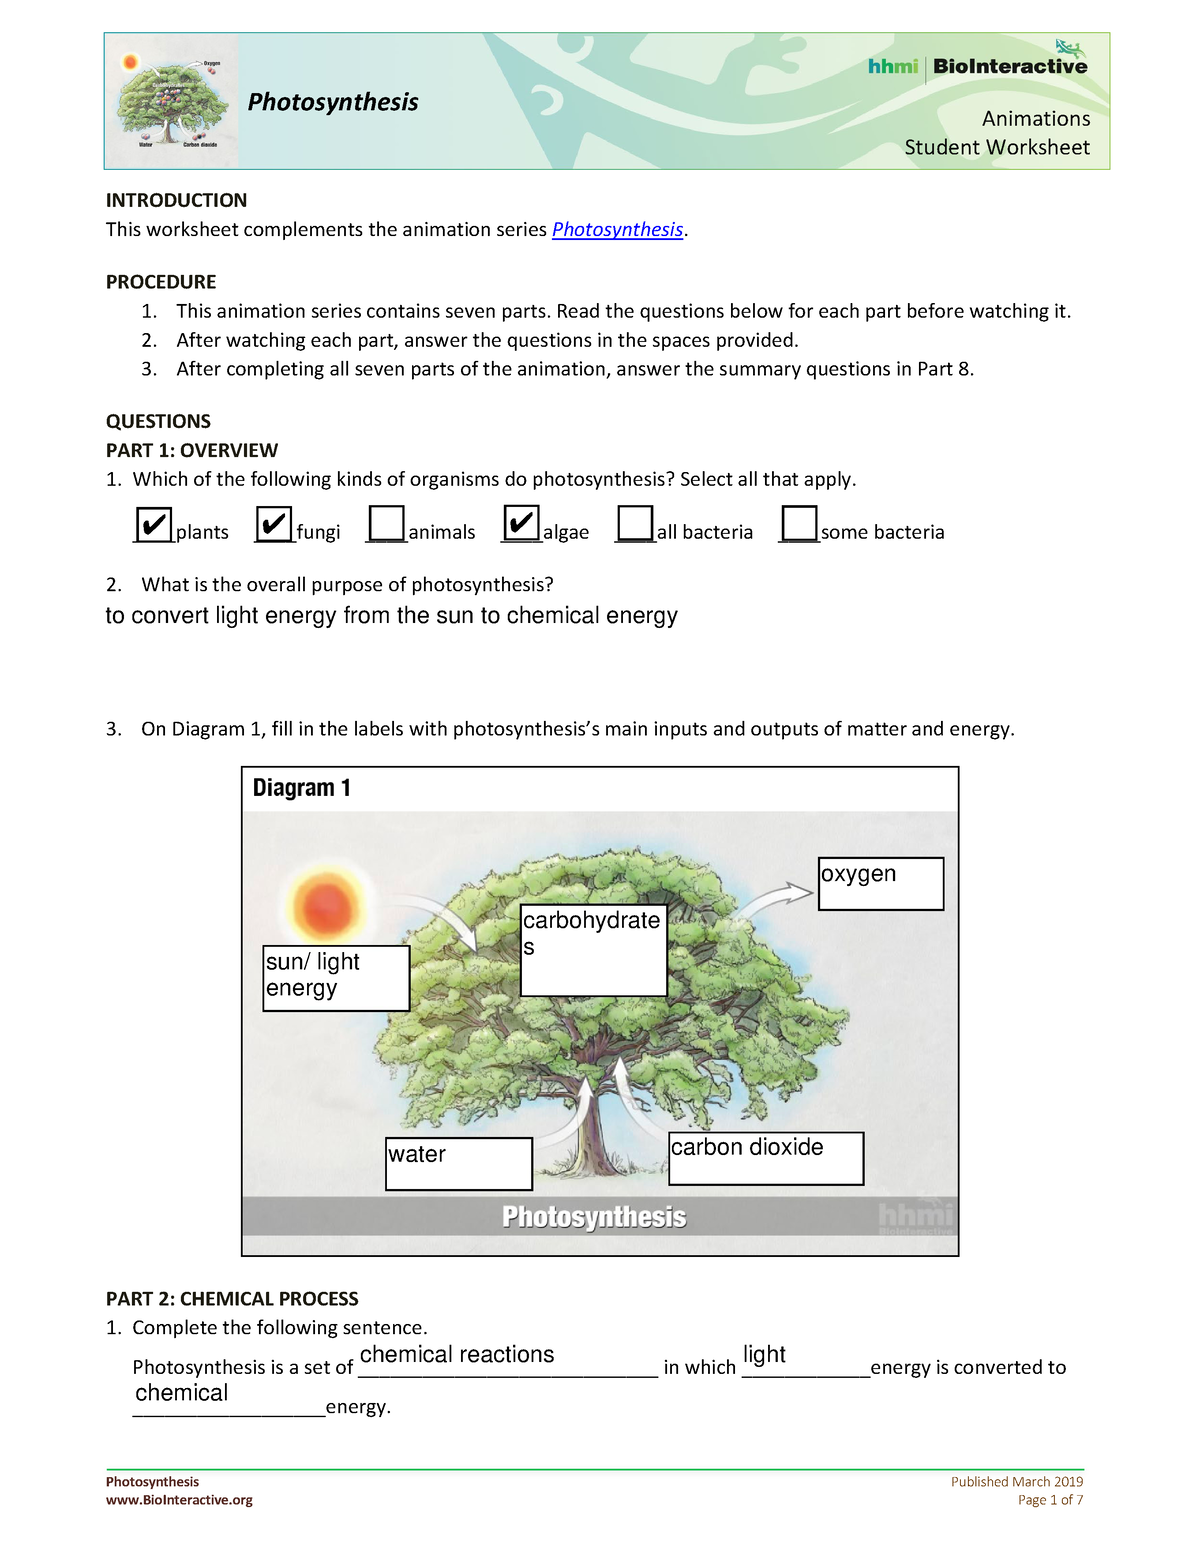 photosynthesis-animations-student-worksheets